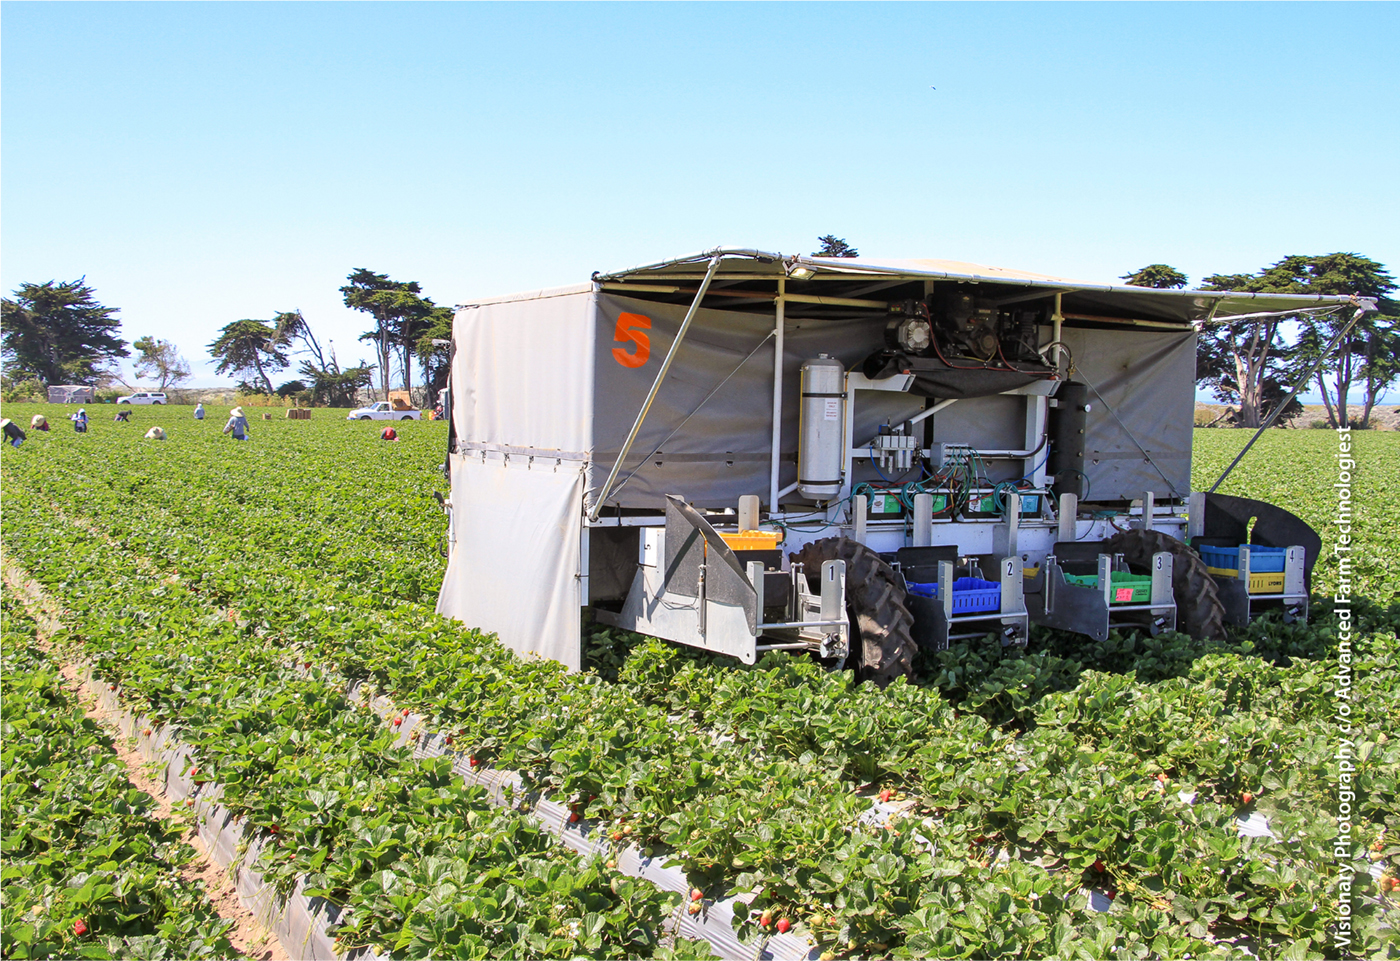 Exterior view of an Advanced Farm Technologies robotic strawberry harvester. Advanced Farm is one of a handful of companies currently working with strawberry growers to test and refine robotic harvest technologies.